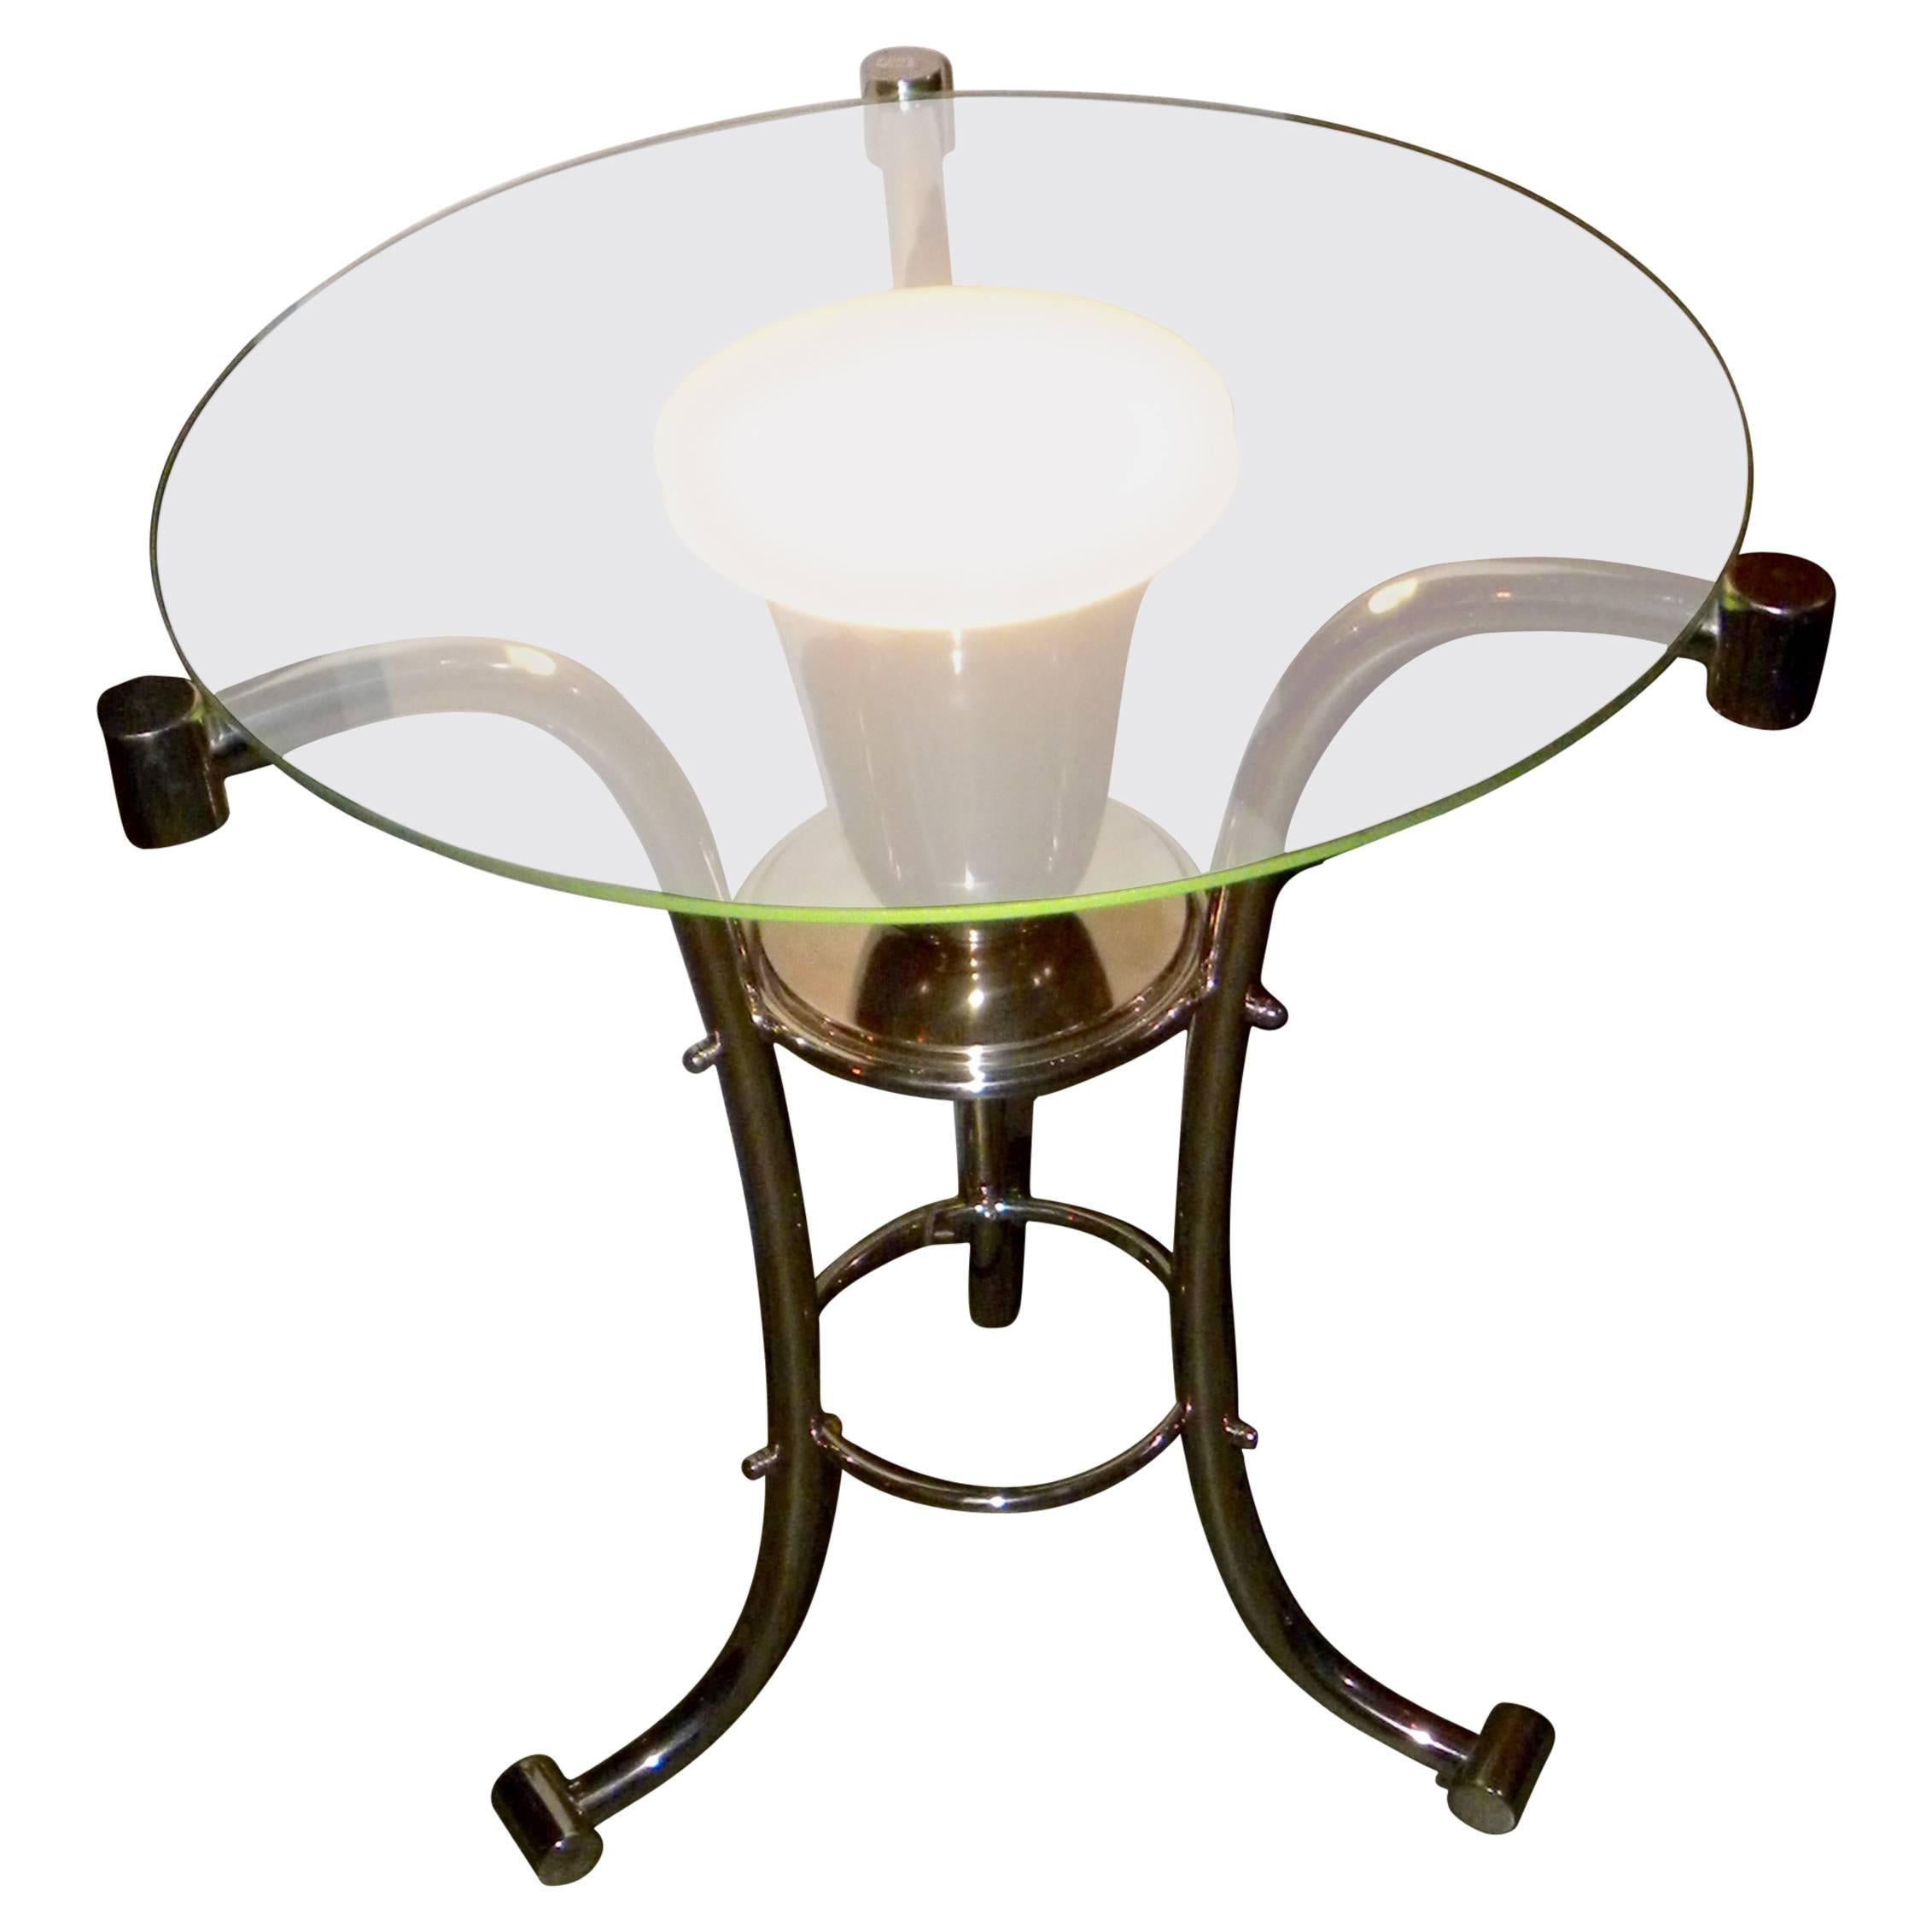 Art Deco Glass Side Table with Uplight